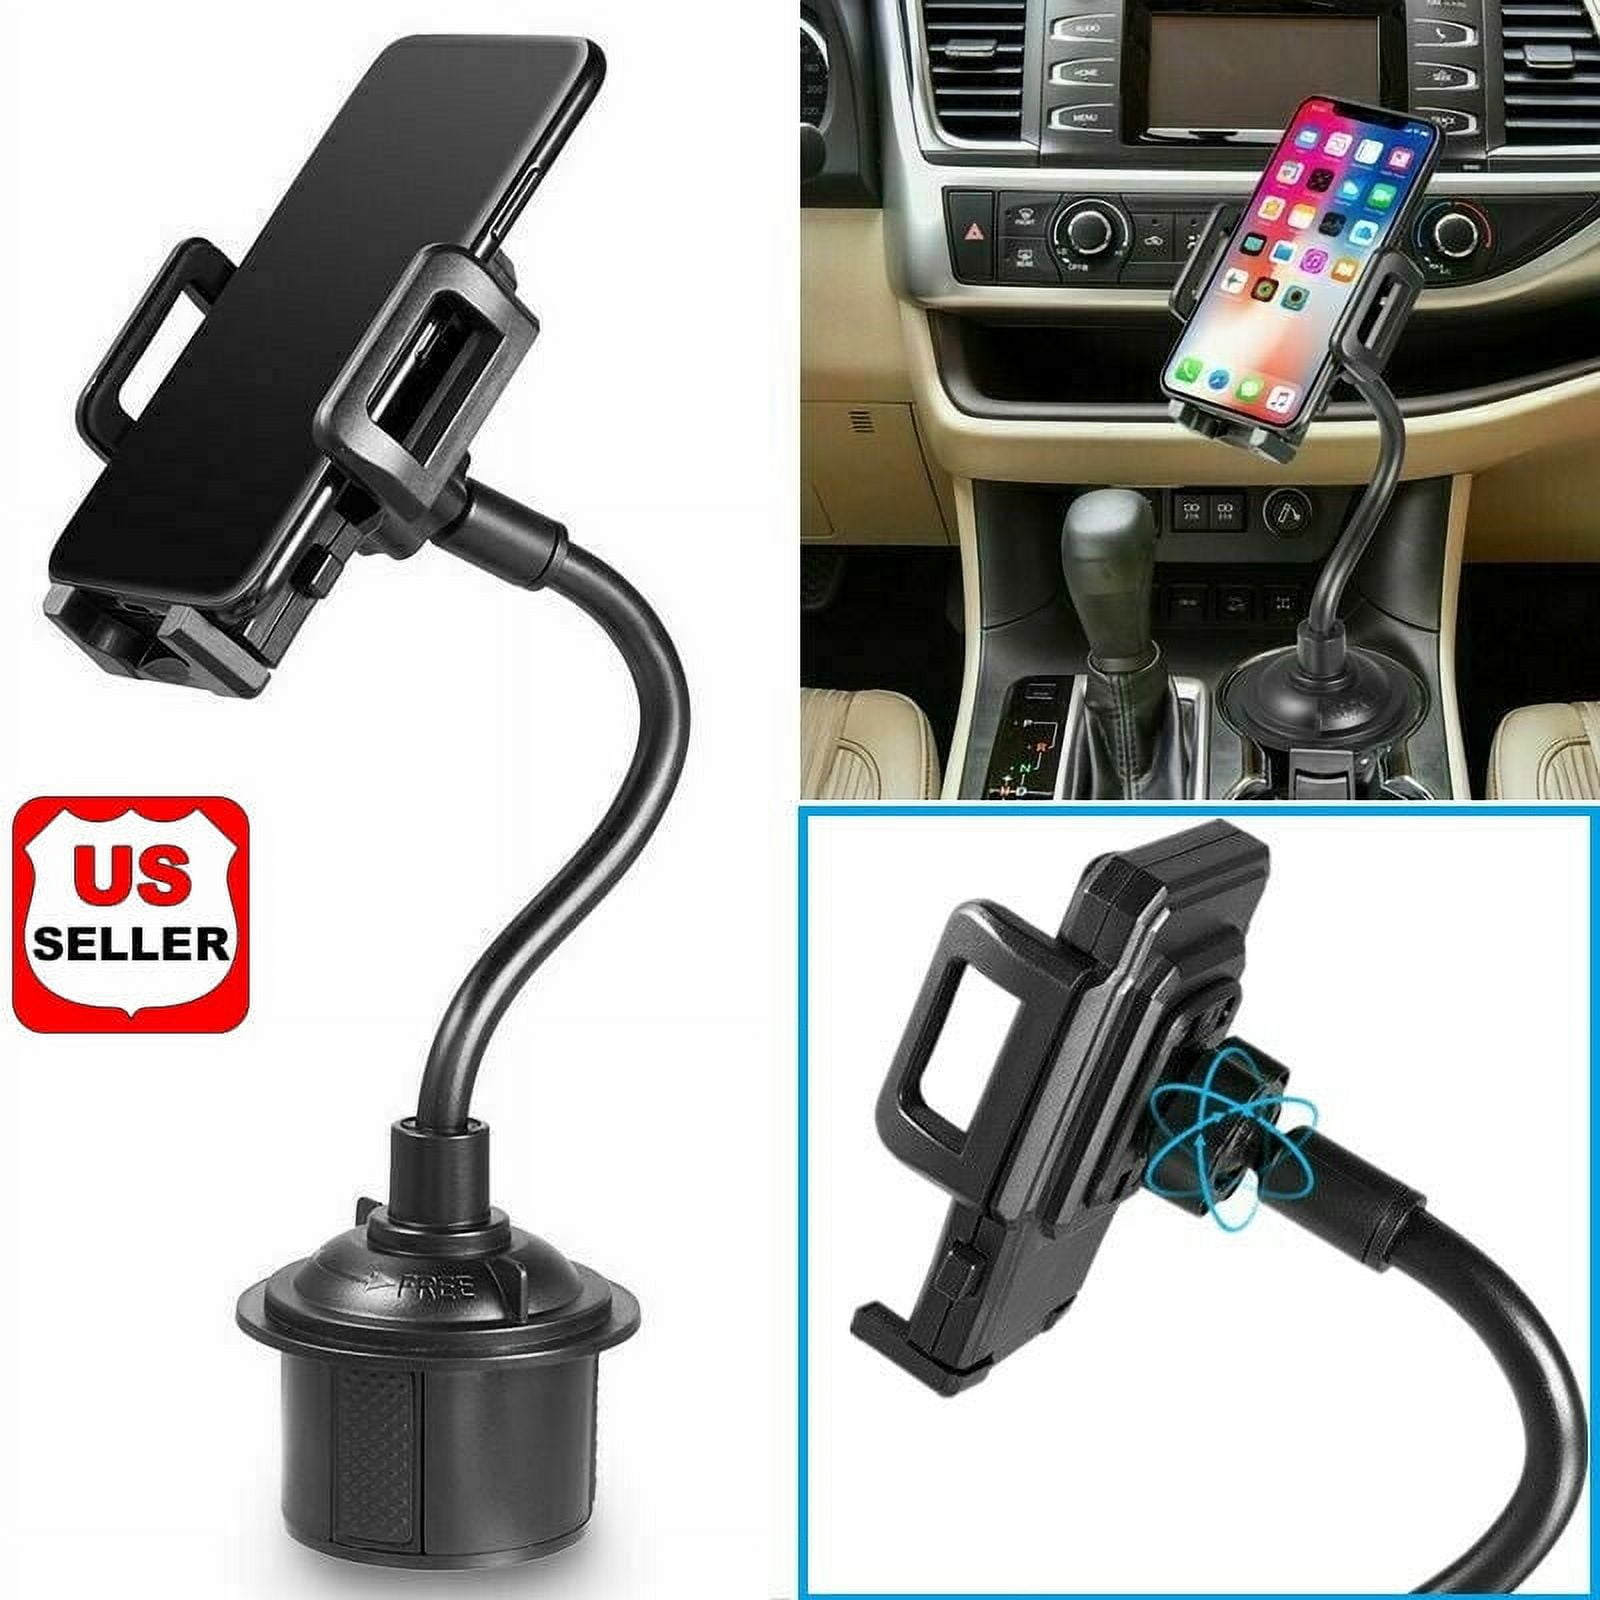 USA Gear Universal Adjustable Vehicle Cup Holder Adapter w/Suction